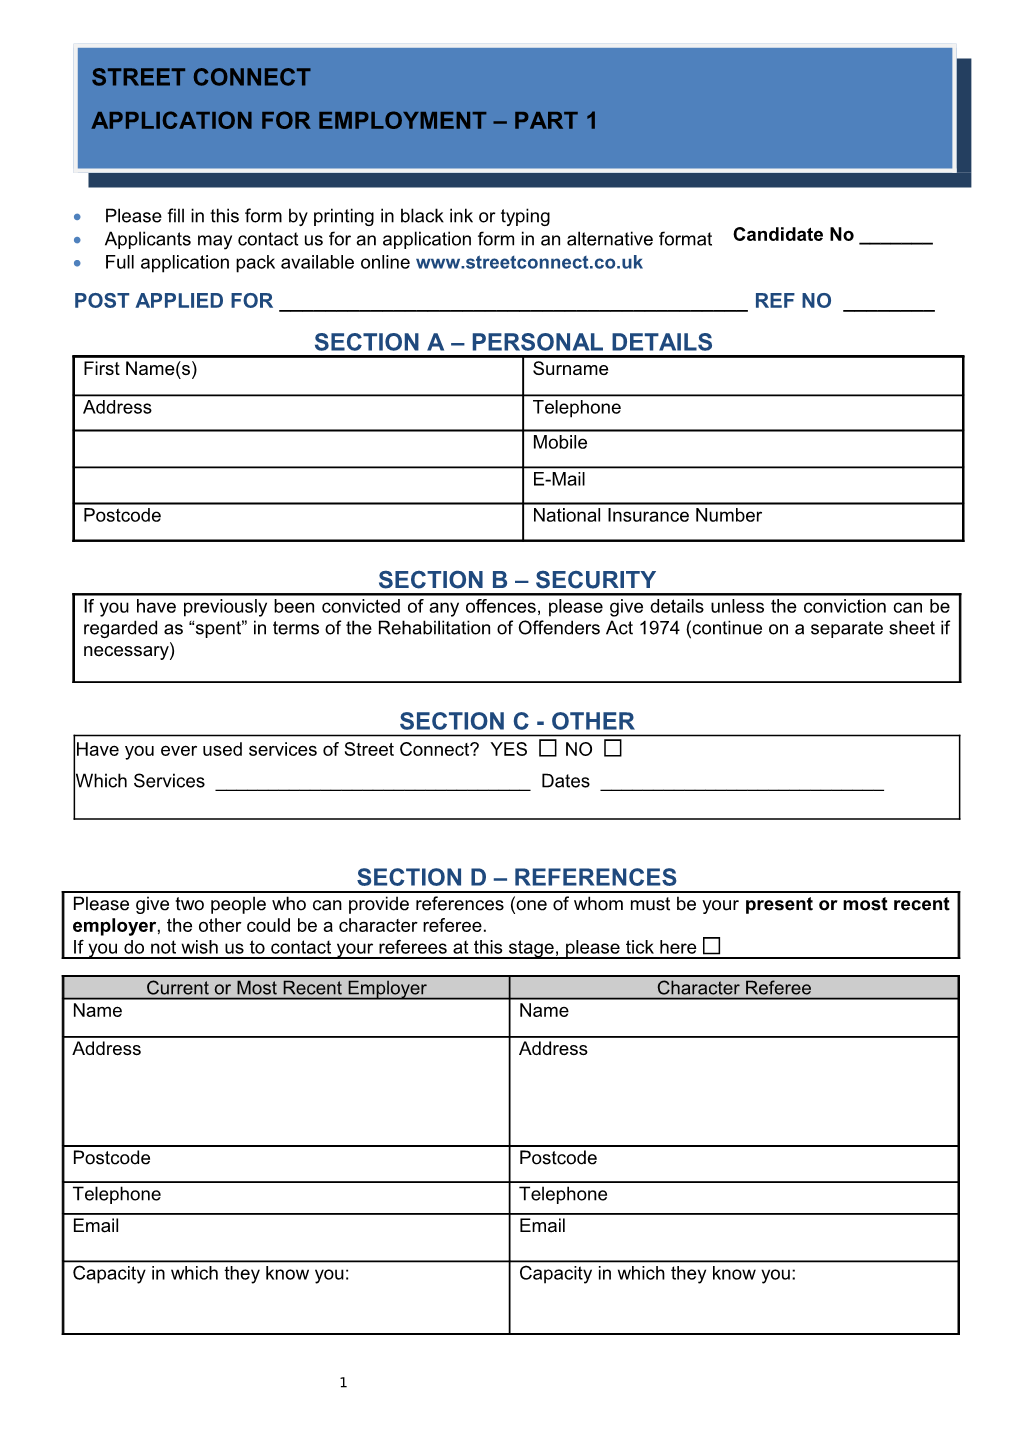 Applicants May Contact Us for an Application Form in an Alternative Format